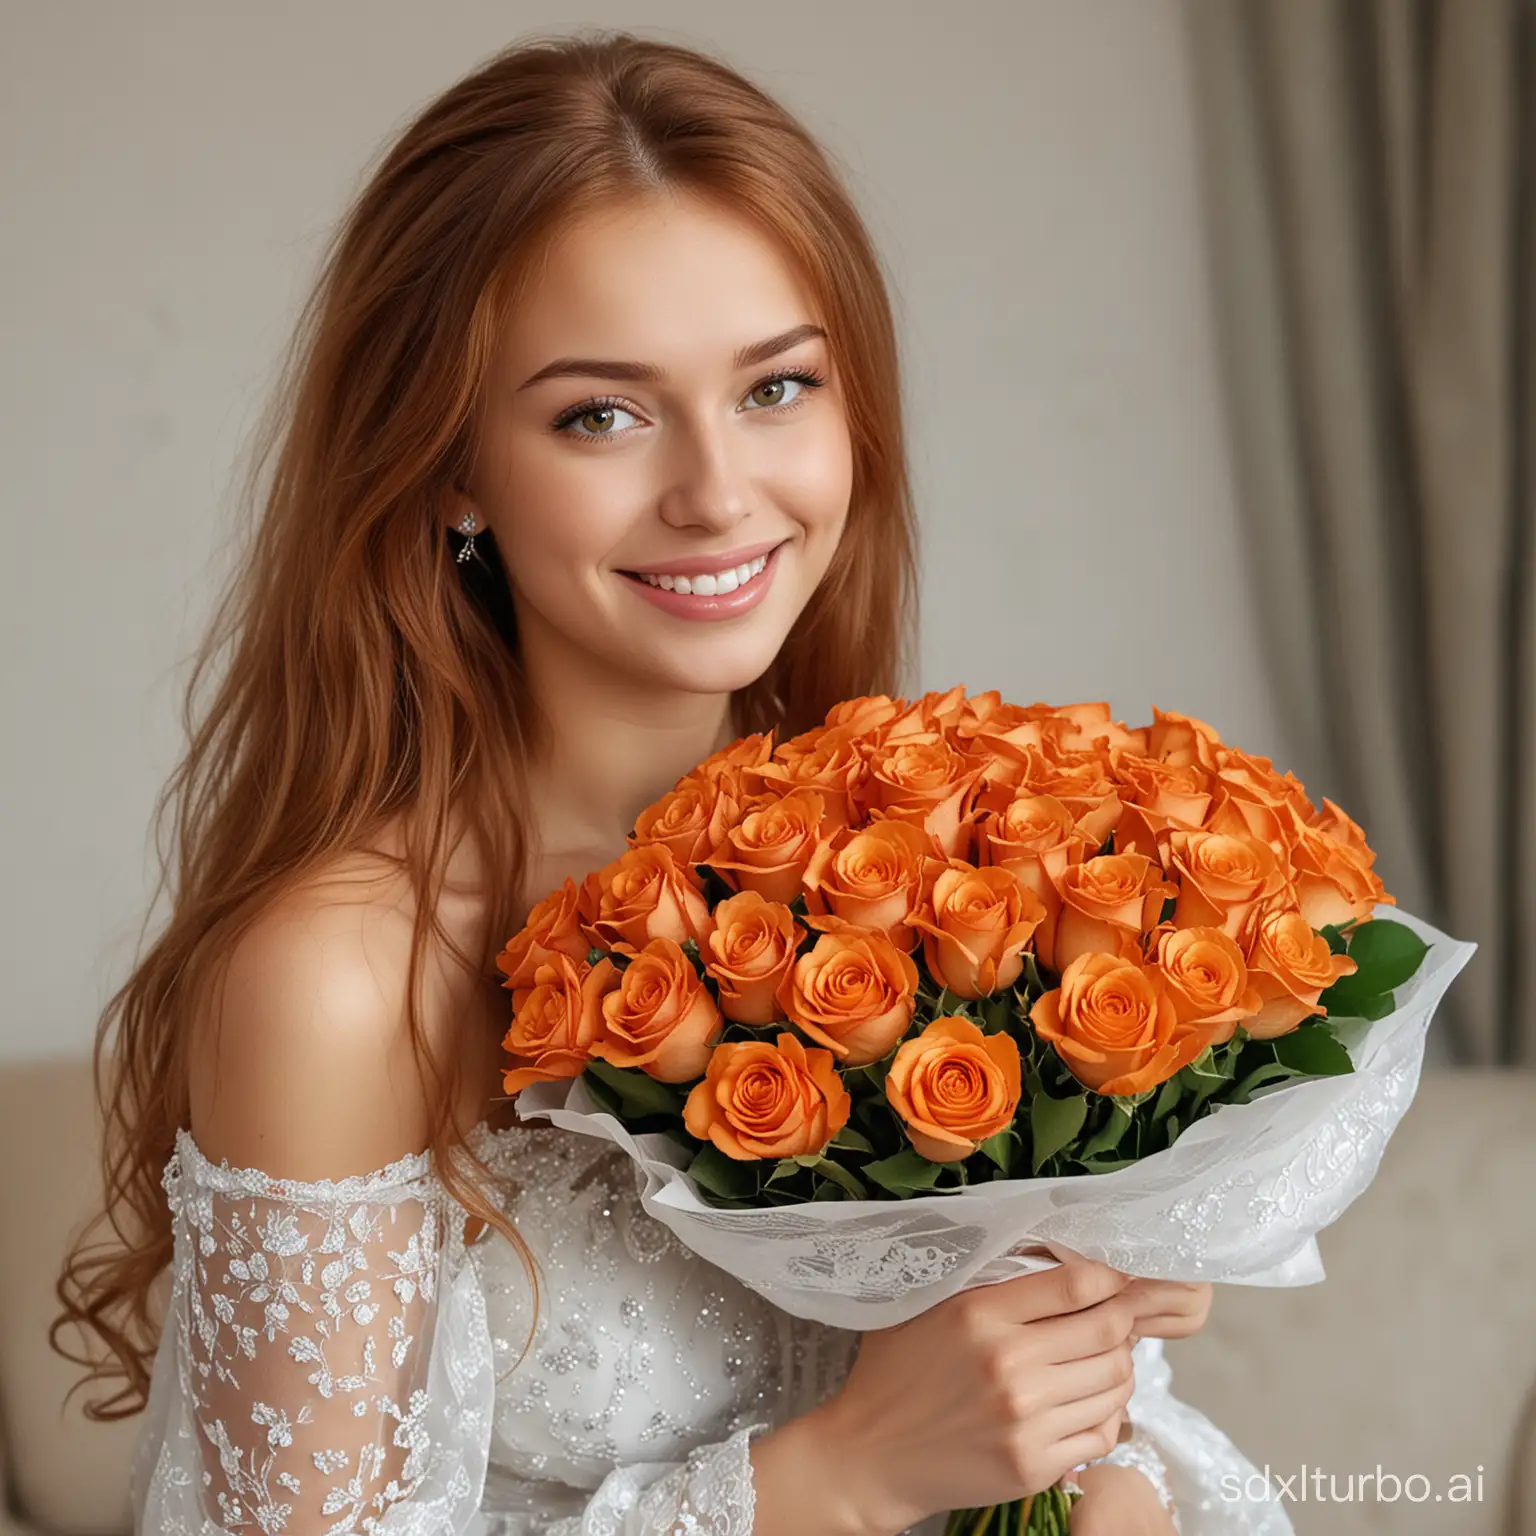 Young Russian girl, perfect face, shy and dignified, very shy, very arousing!!!! The cutest, the cutest face, the most beautiful eyes, super friendly smile, eyes very meticulous, eyes looking at the camera, very meticulous eyes, realistic в вечернем платье, с рыжими длинными волосами держит большой букет из 101 оранжевой розы, стоит в гостиной комнате